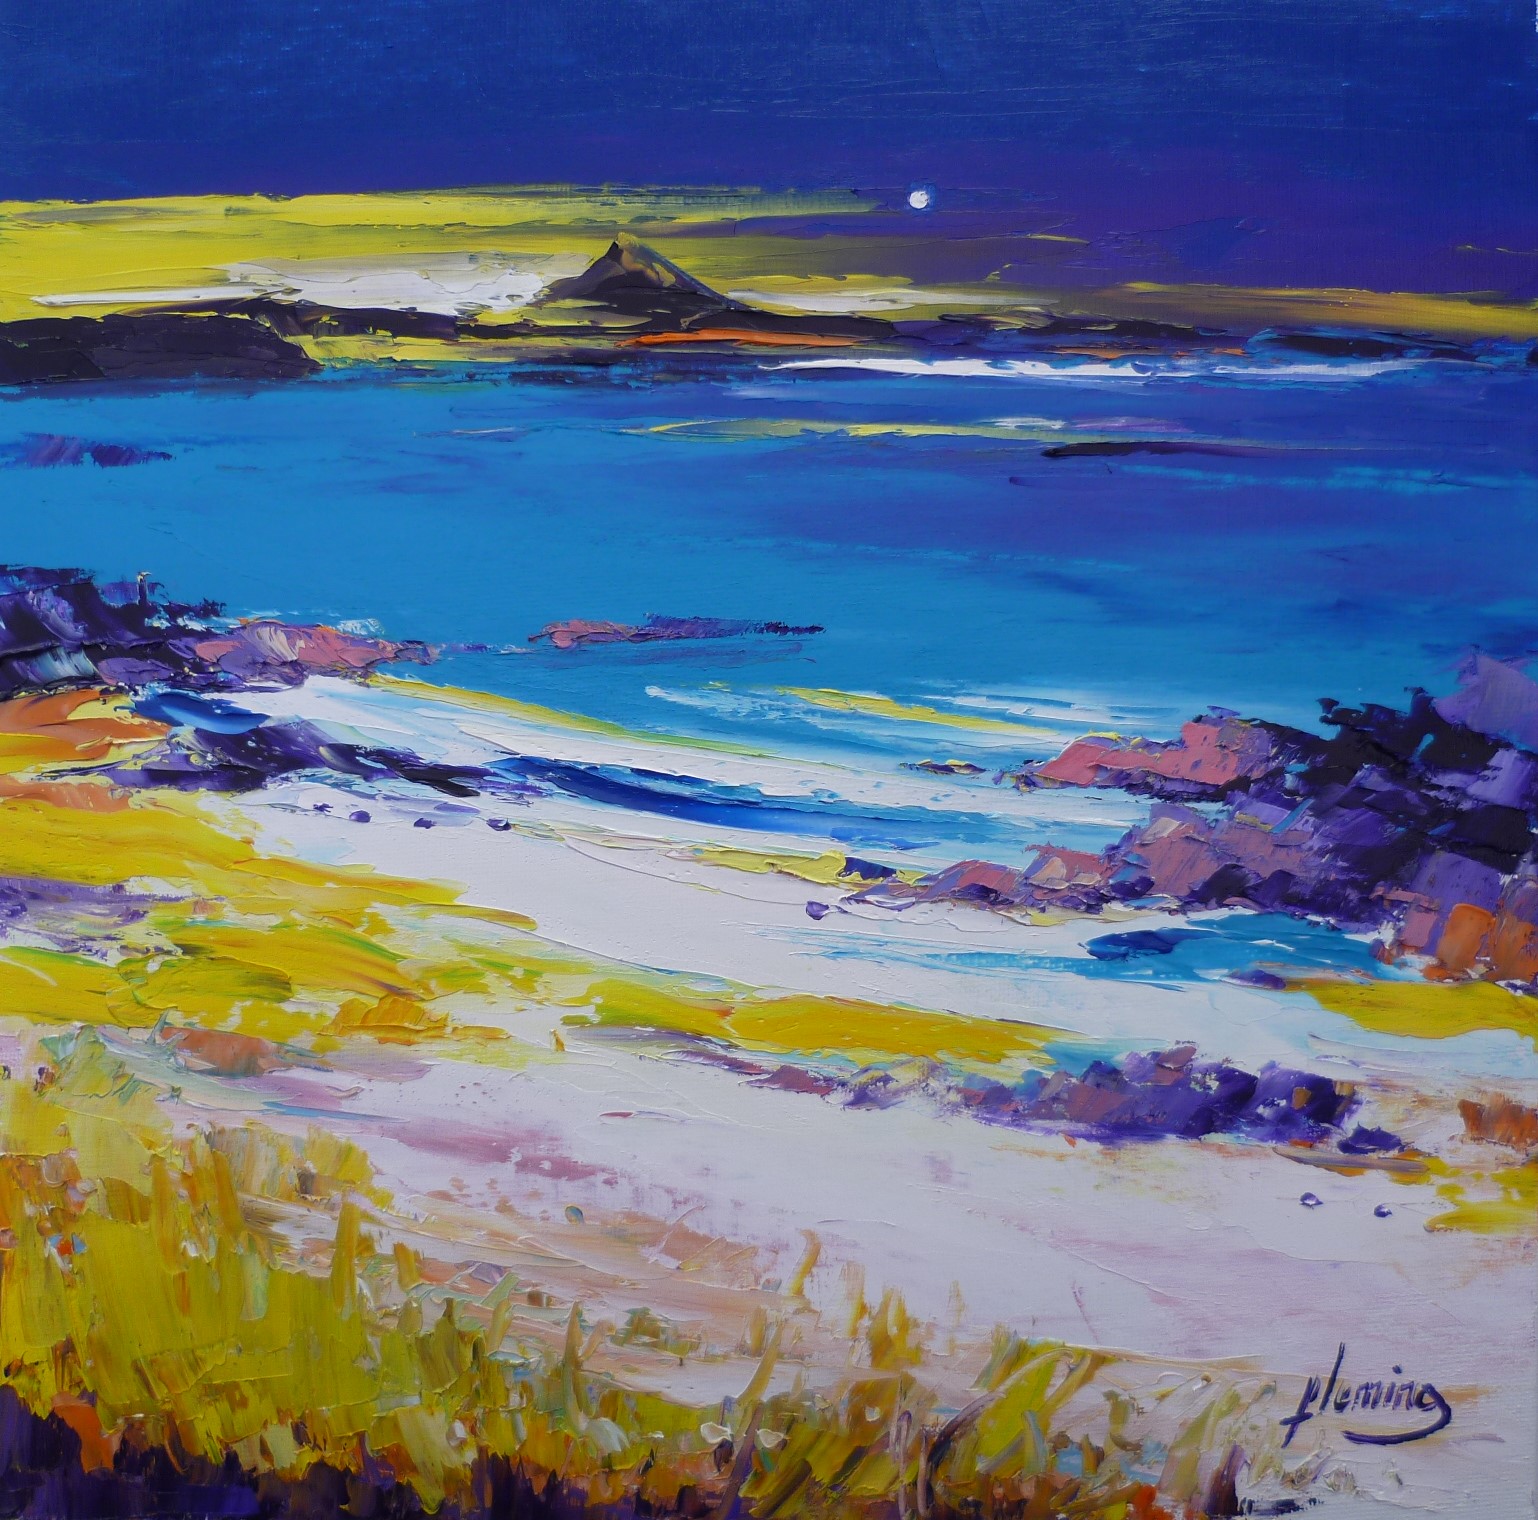 12.Balnahard Bay Colonsay, with Autumn Moon over Ben More, Mull